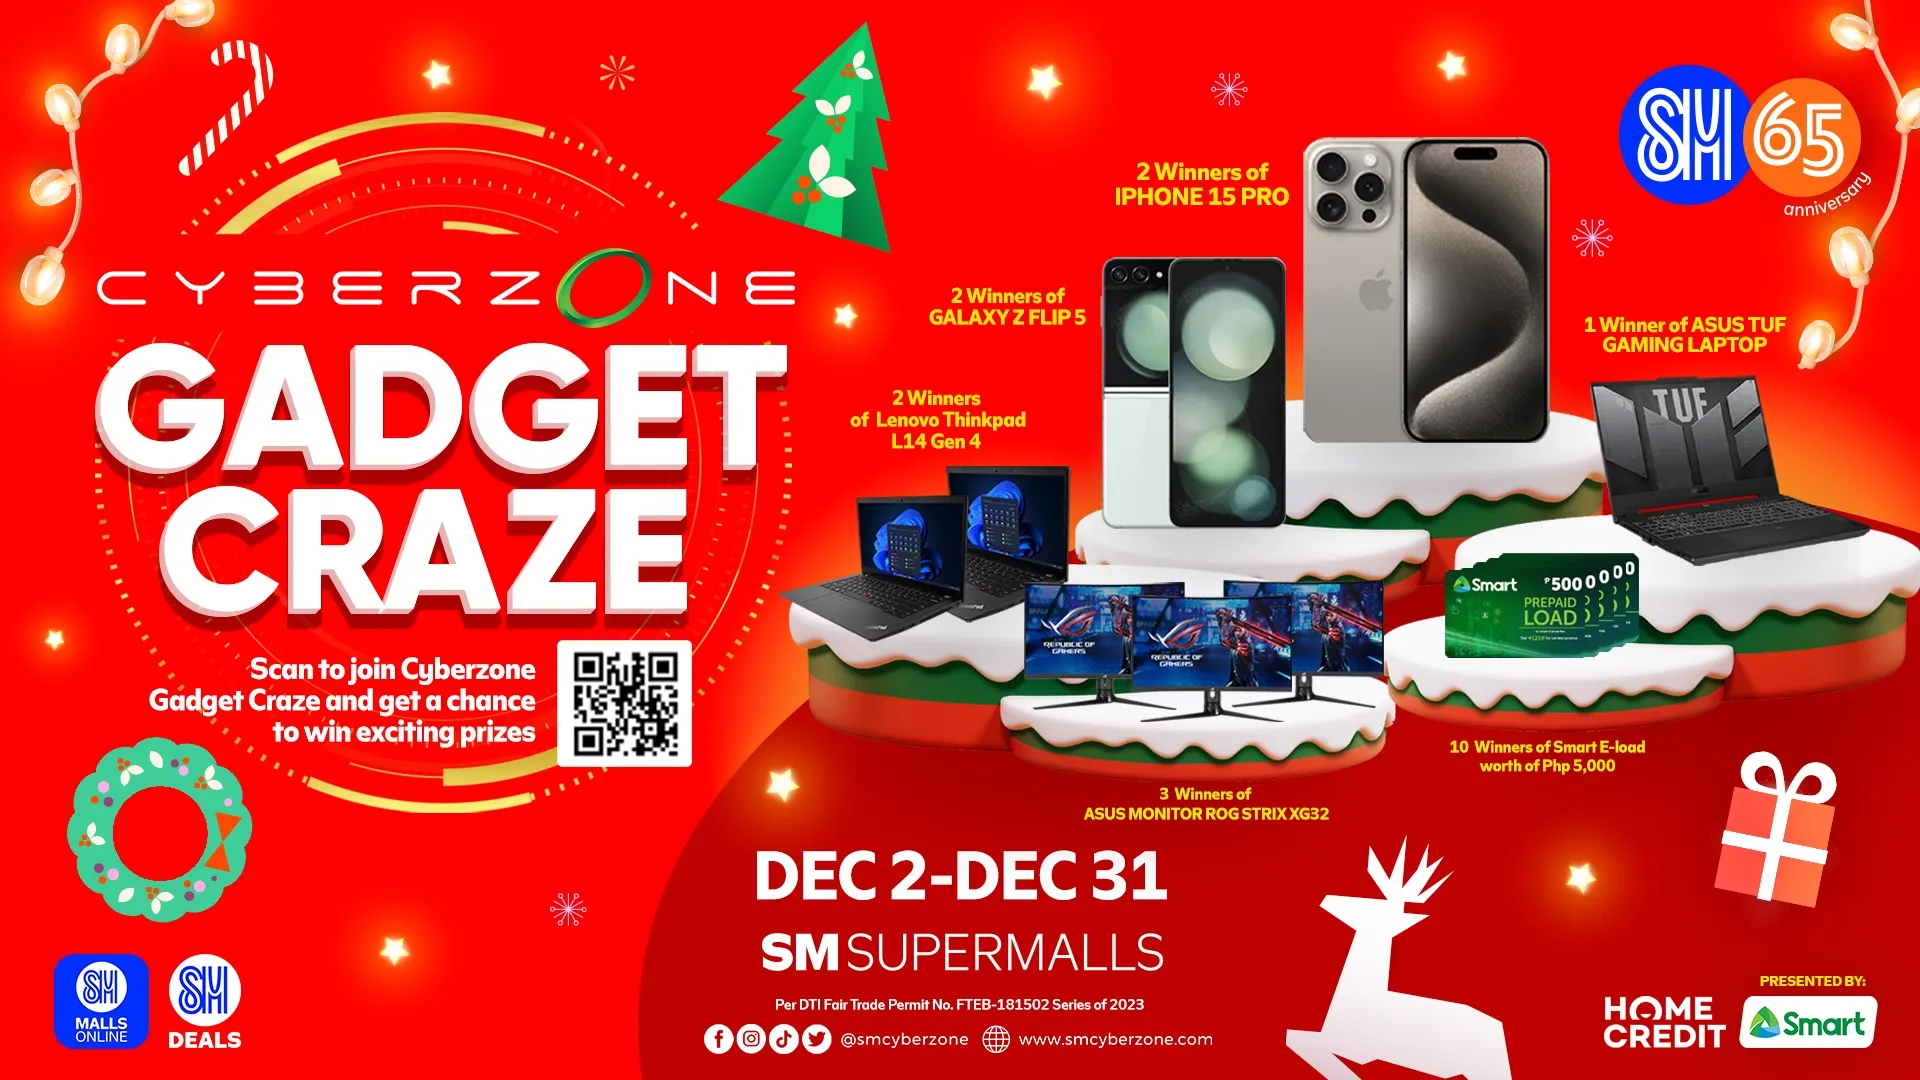 a-tech-perfect-year-starts-with-cyberzone-gadget-craze